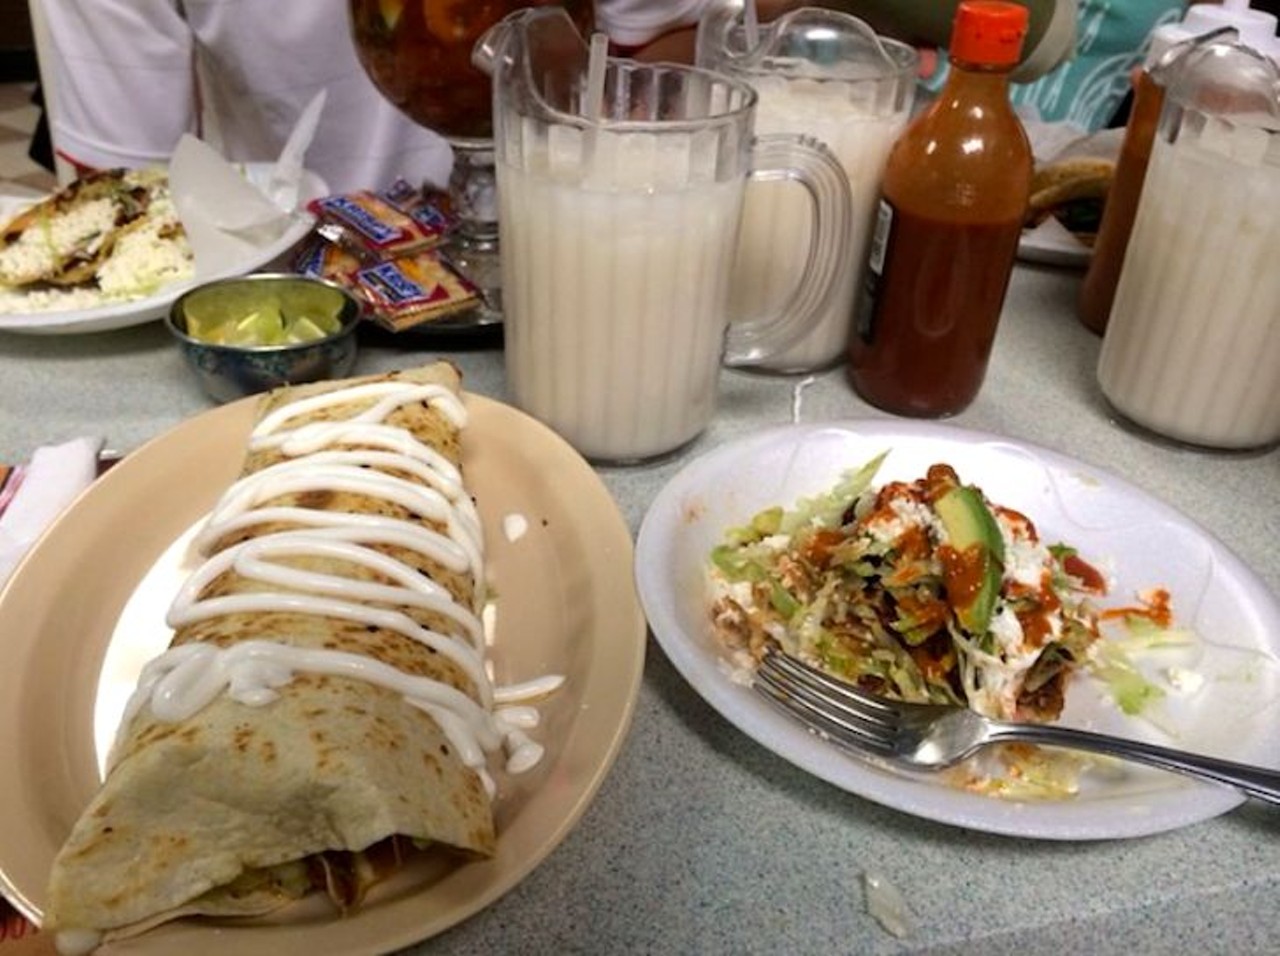 El Pueblo Mexican Restaurant  
7124 Aloma Ave, Winter Park, 407- 677-5534
This small spot packs big flavor with its tacos, sopas and spicy salsa. Share a refreshing pitcher of horchata with your dining companion for a sweet finish. 
Photo via kikiestradac/Instagram